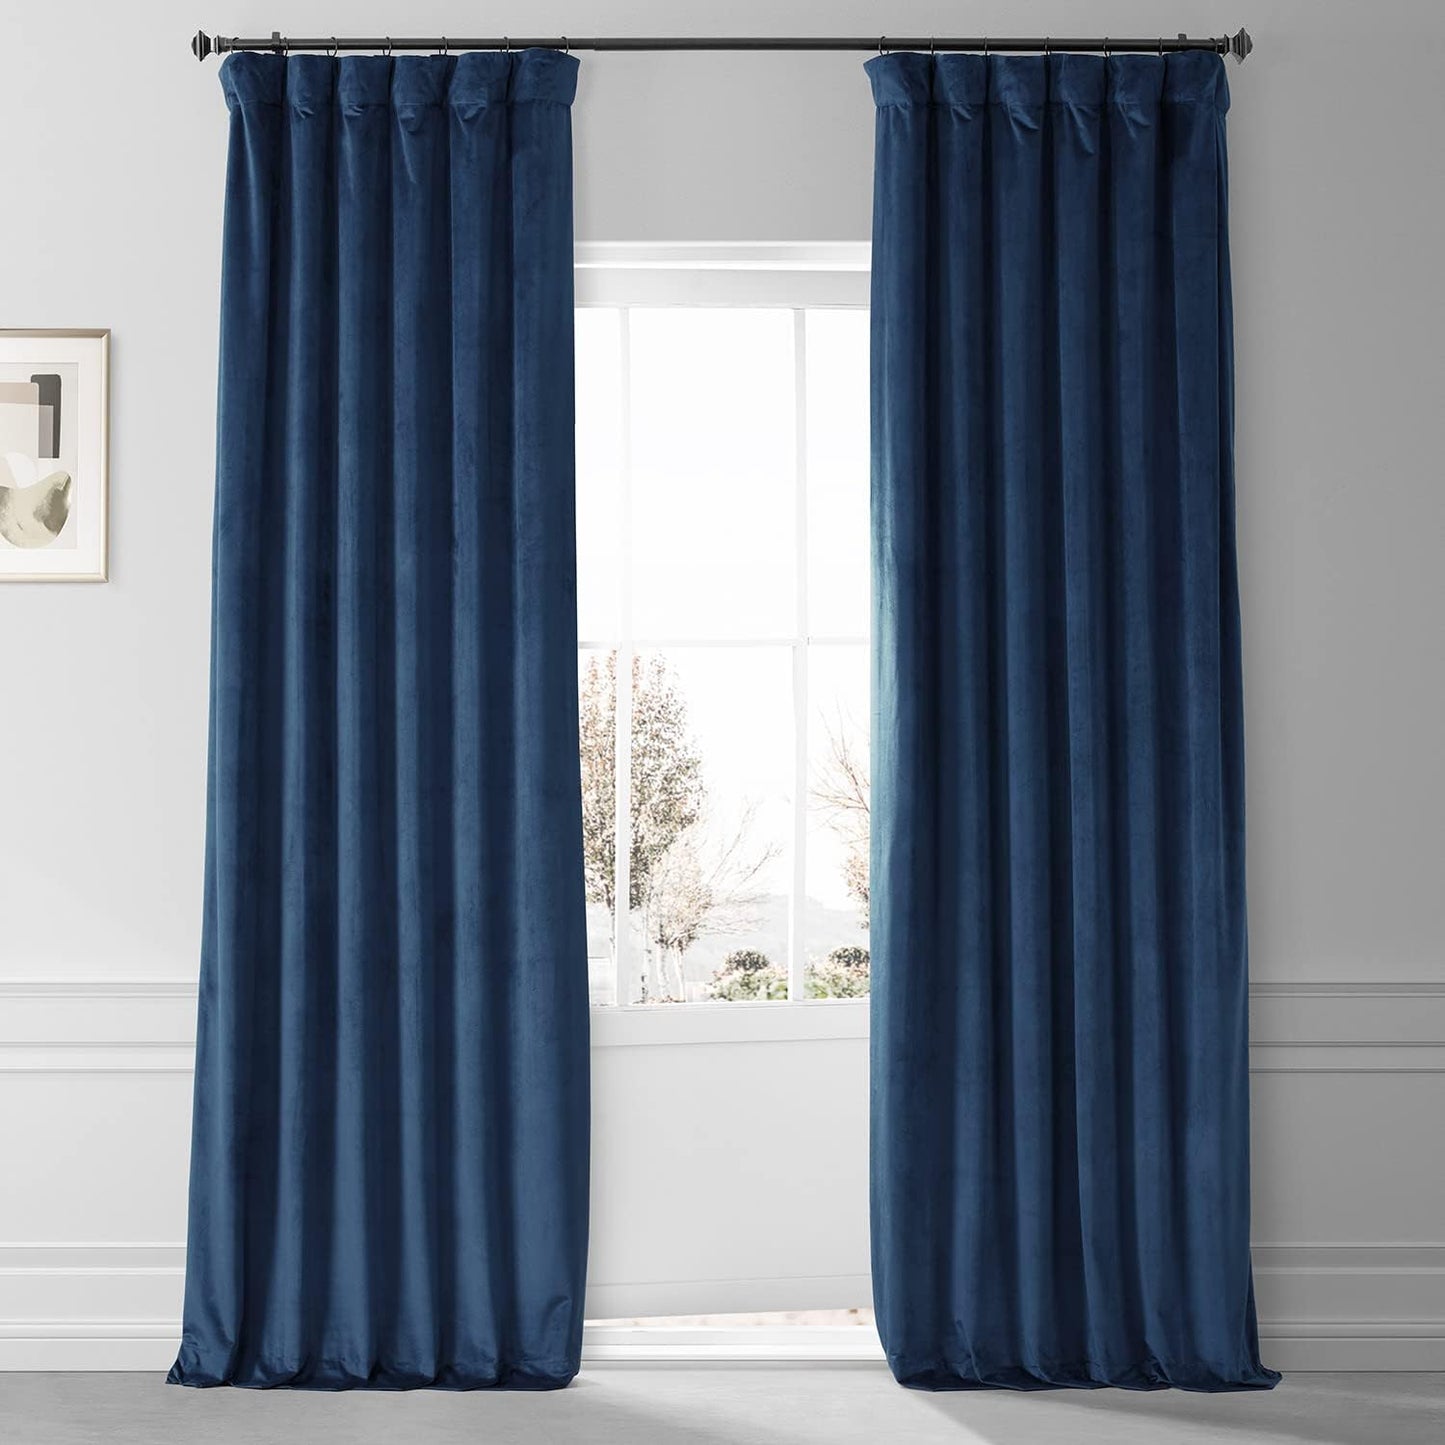 HPD HALF PRICE DRAPES Blackout Solid Thermal Insulated Window Curtain 50 X 96 Signature Plush Velvet Curtains for Bedroom & Living Room (1 Panel), VPYC-SBO198593-96, Diva Cream  Exclusive Fabrics & Furnishings Dreamland Blue 50 X 108 